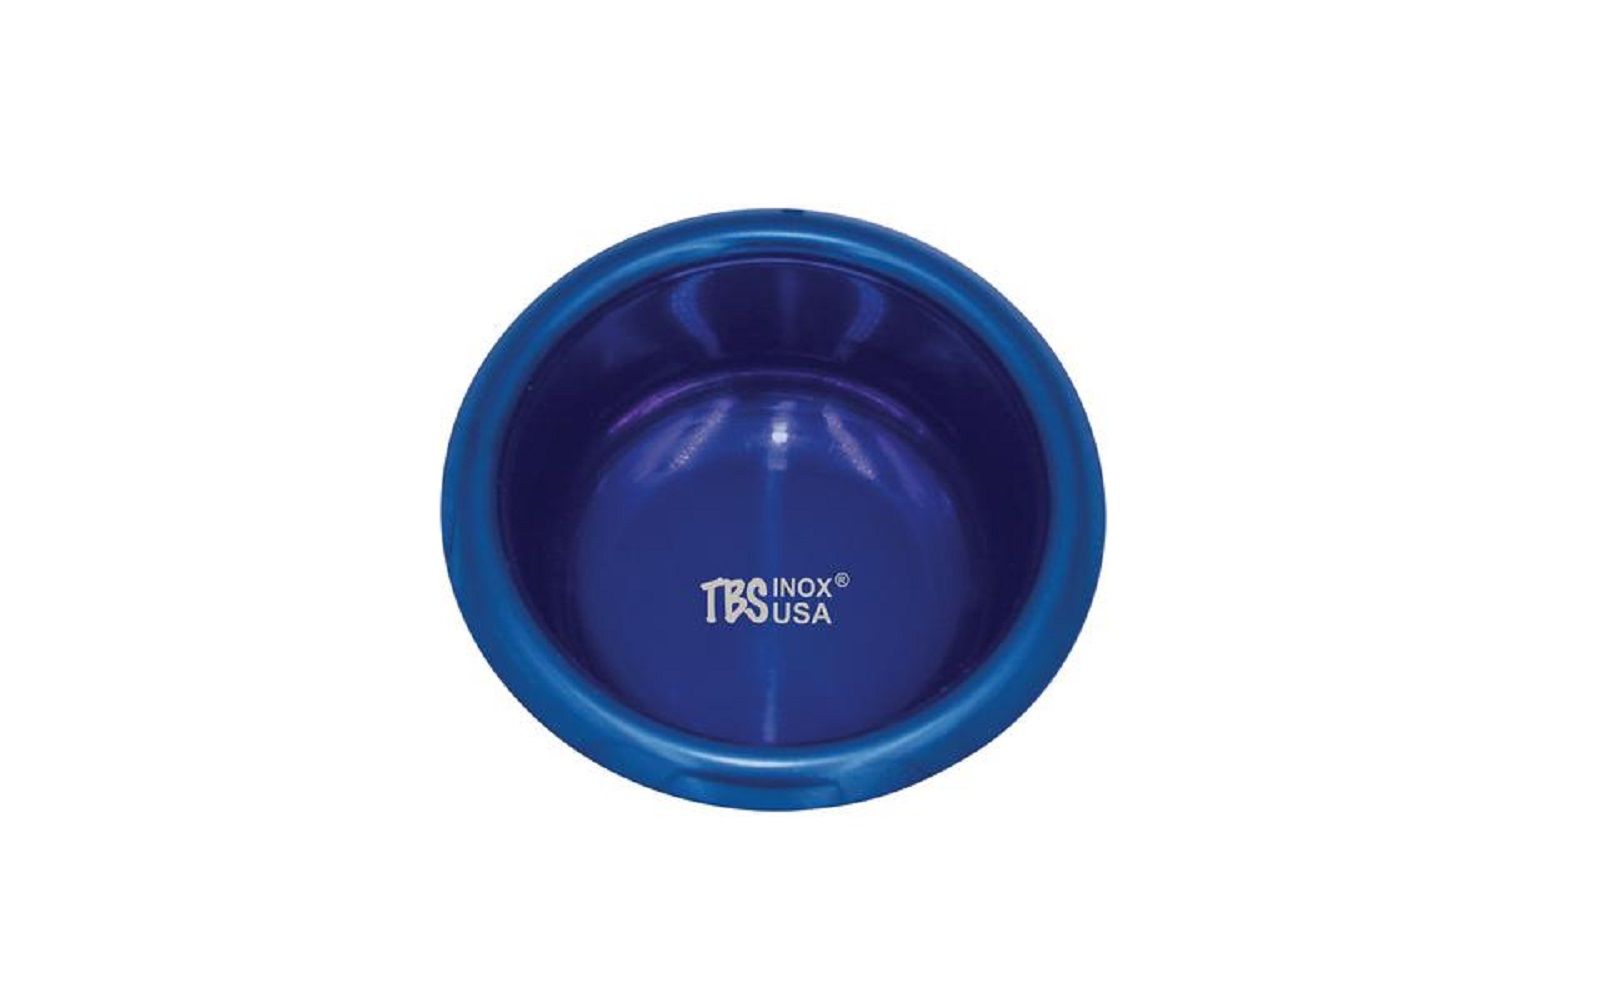 Titanium coated stainless steel mixing bowl, blue